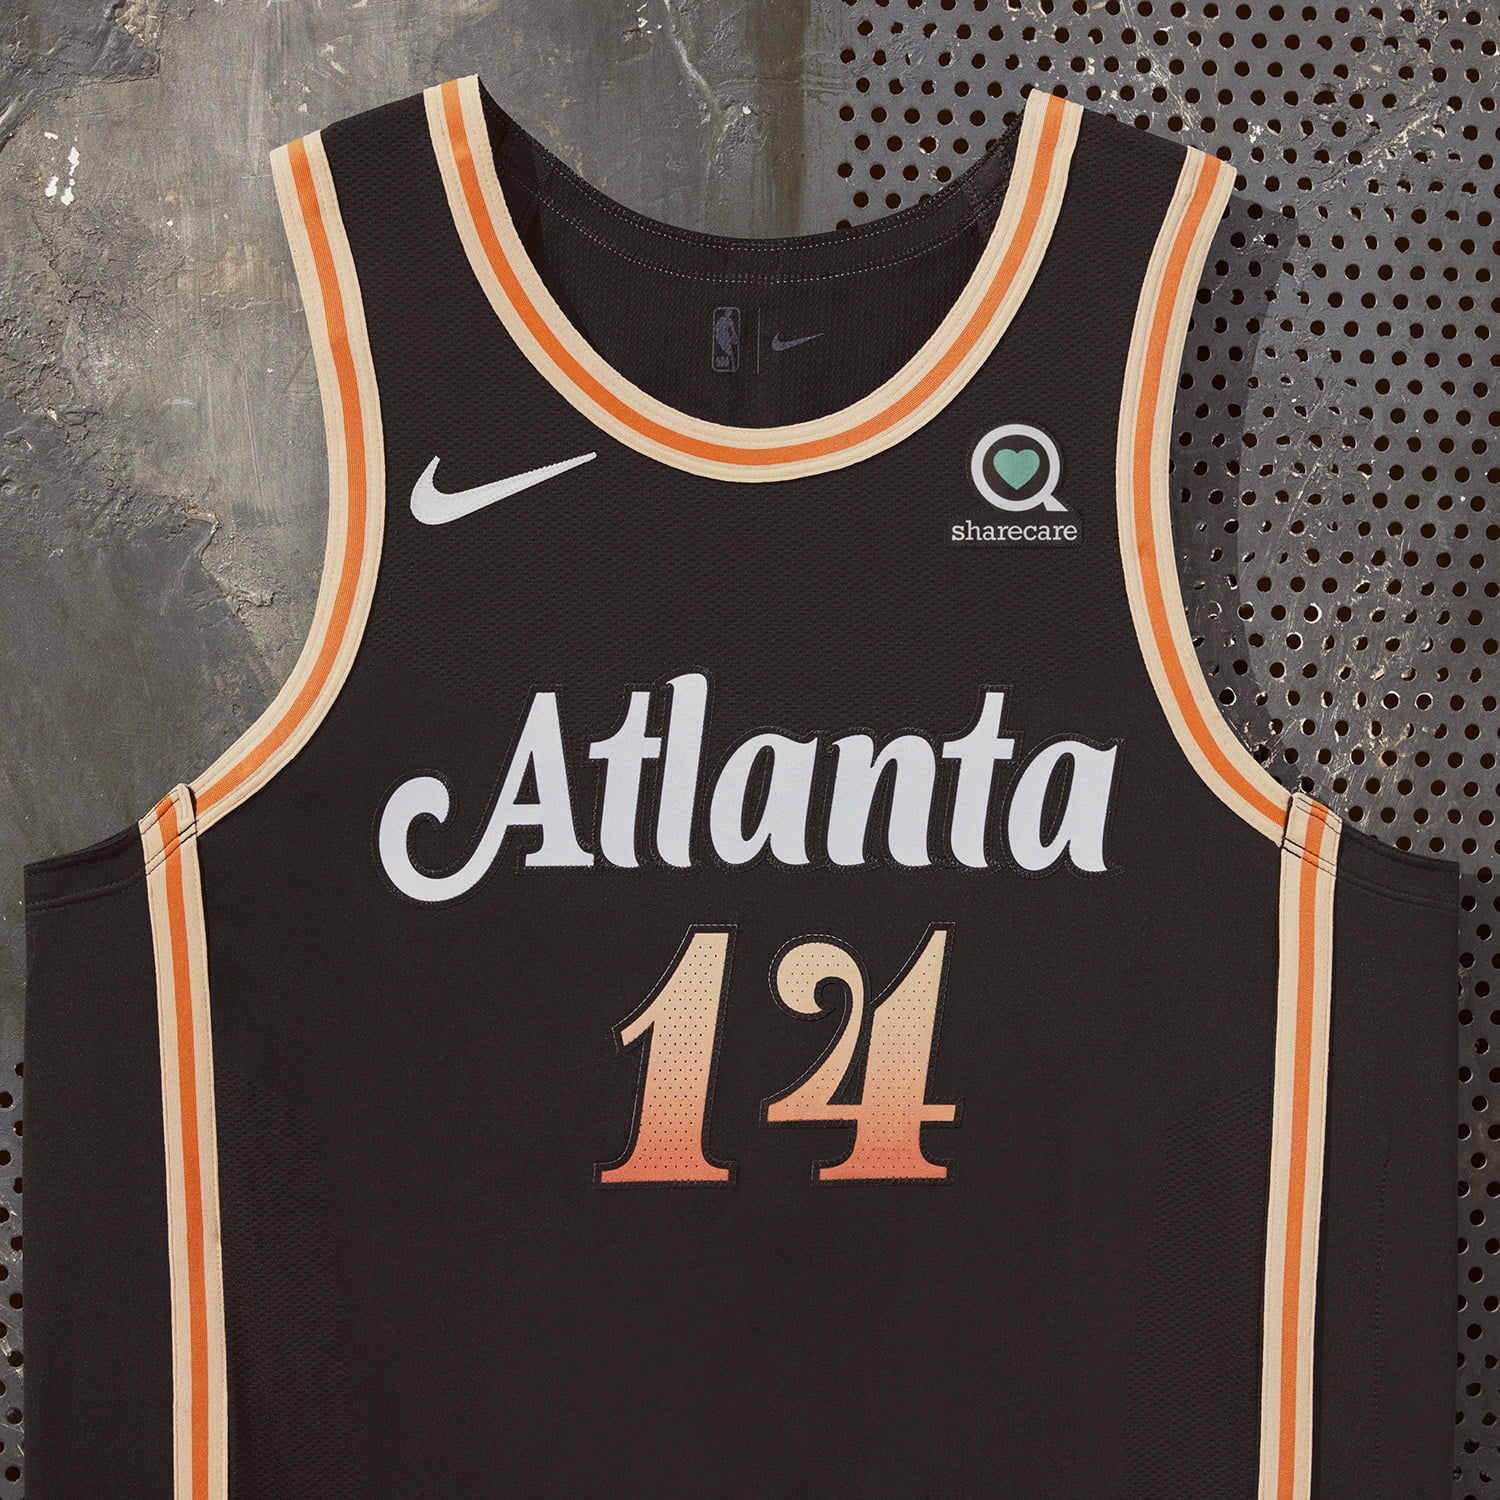 The trees are back! Wolves unveil 2021-22 City Edition uniform